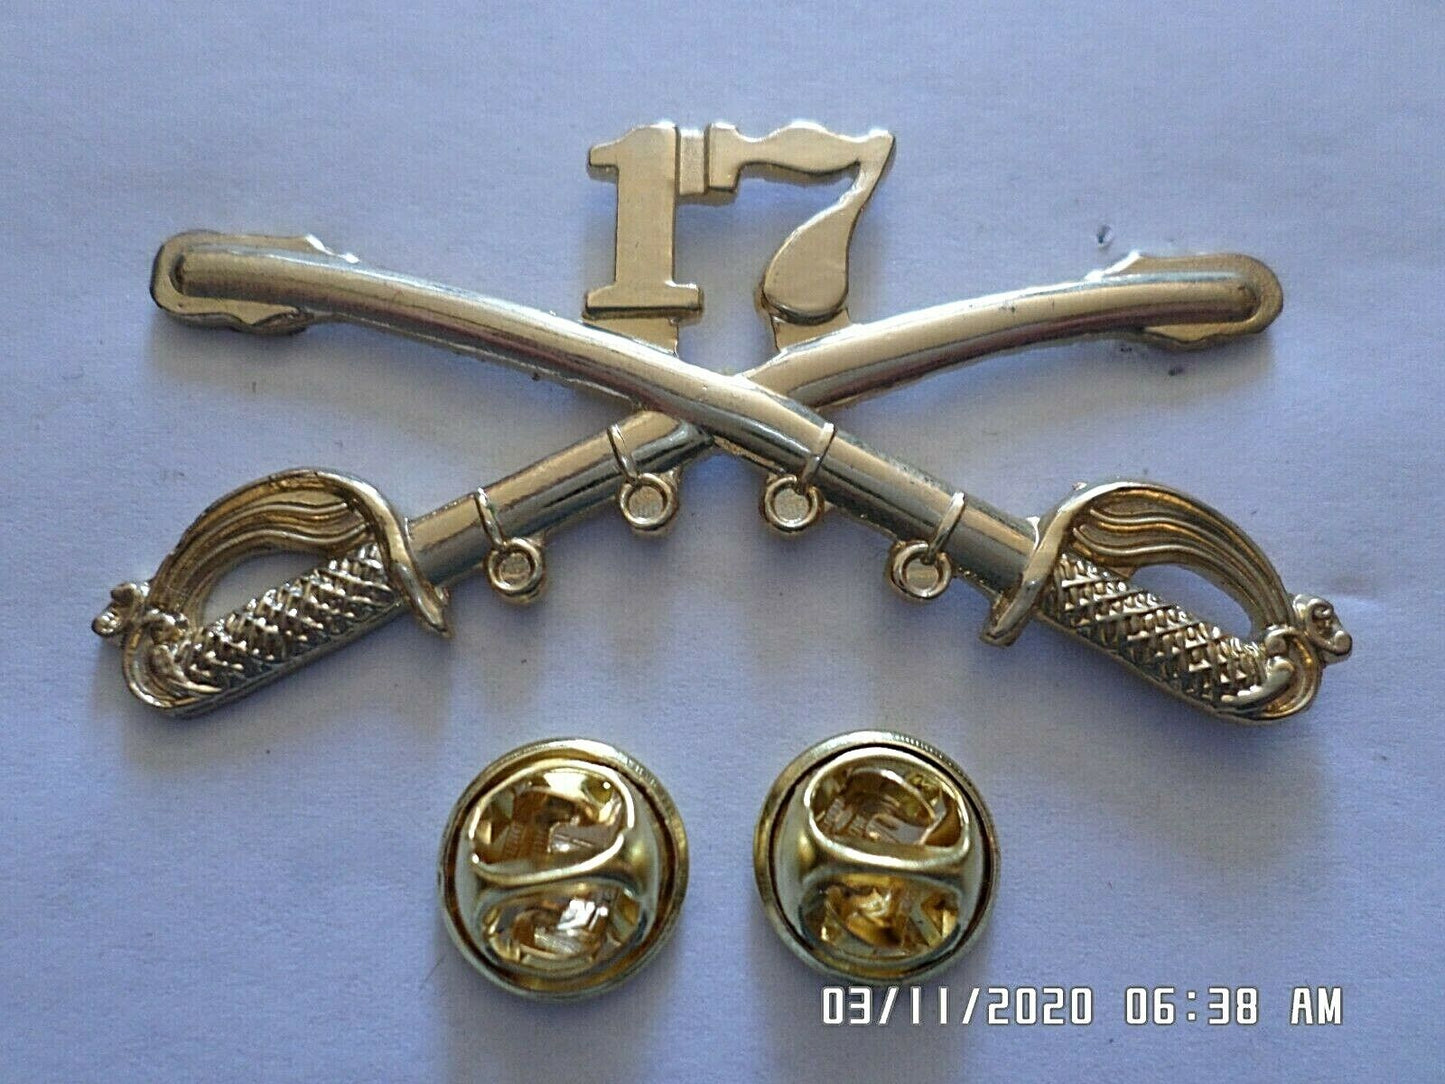 17th CAVALRY SWORDS SABERS MILITARY HAT PIN 17th CAVALRY REGIMENT BADGE U.S ARMY